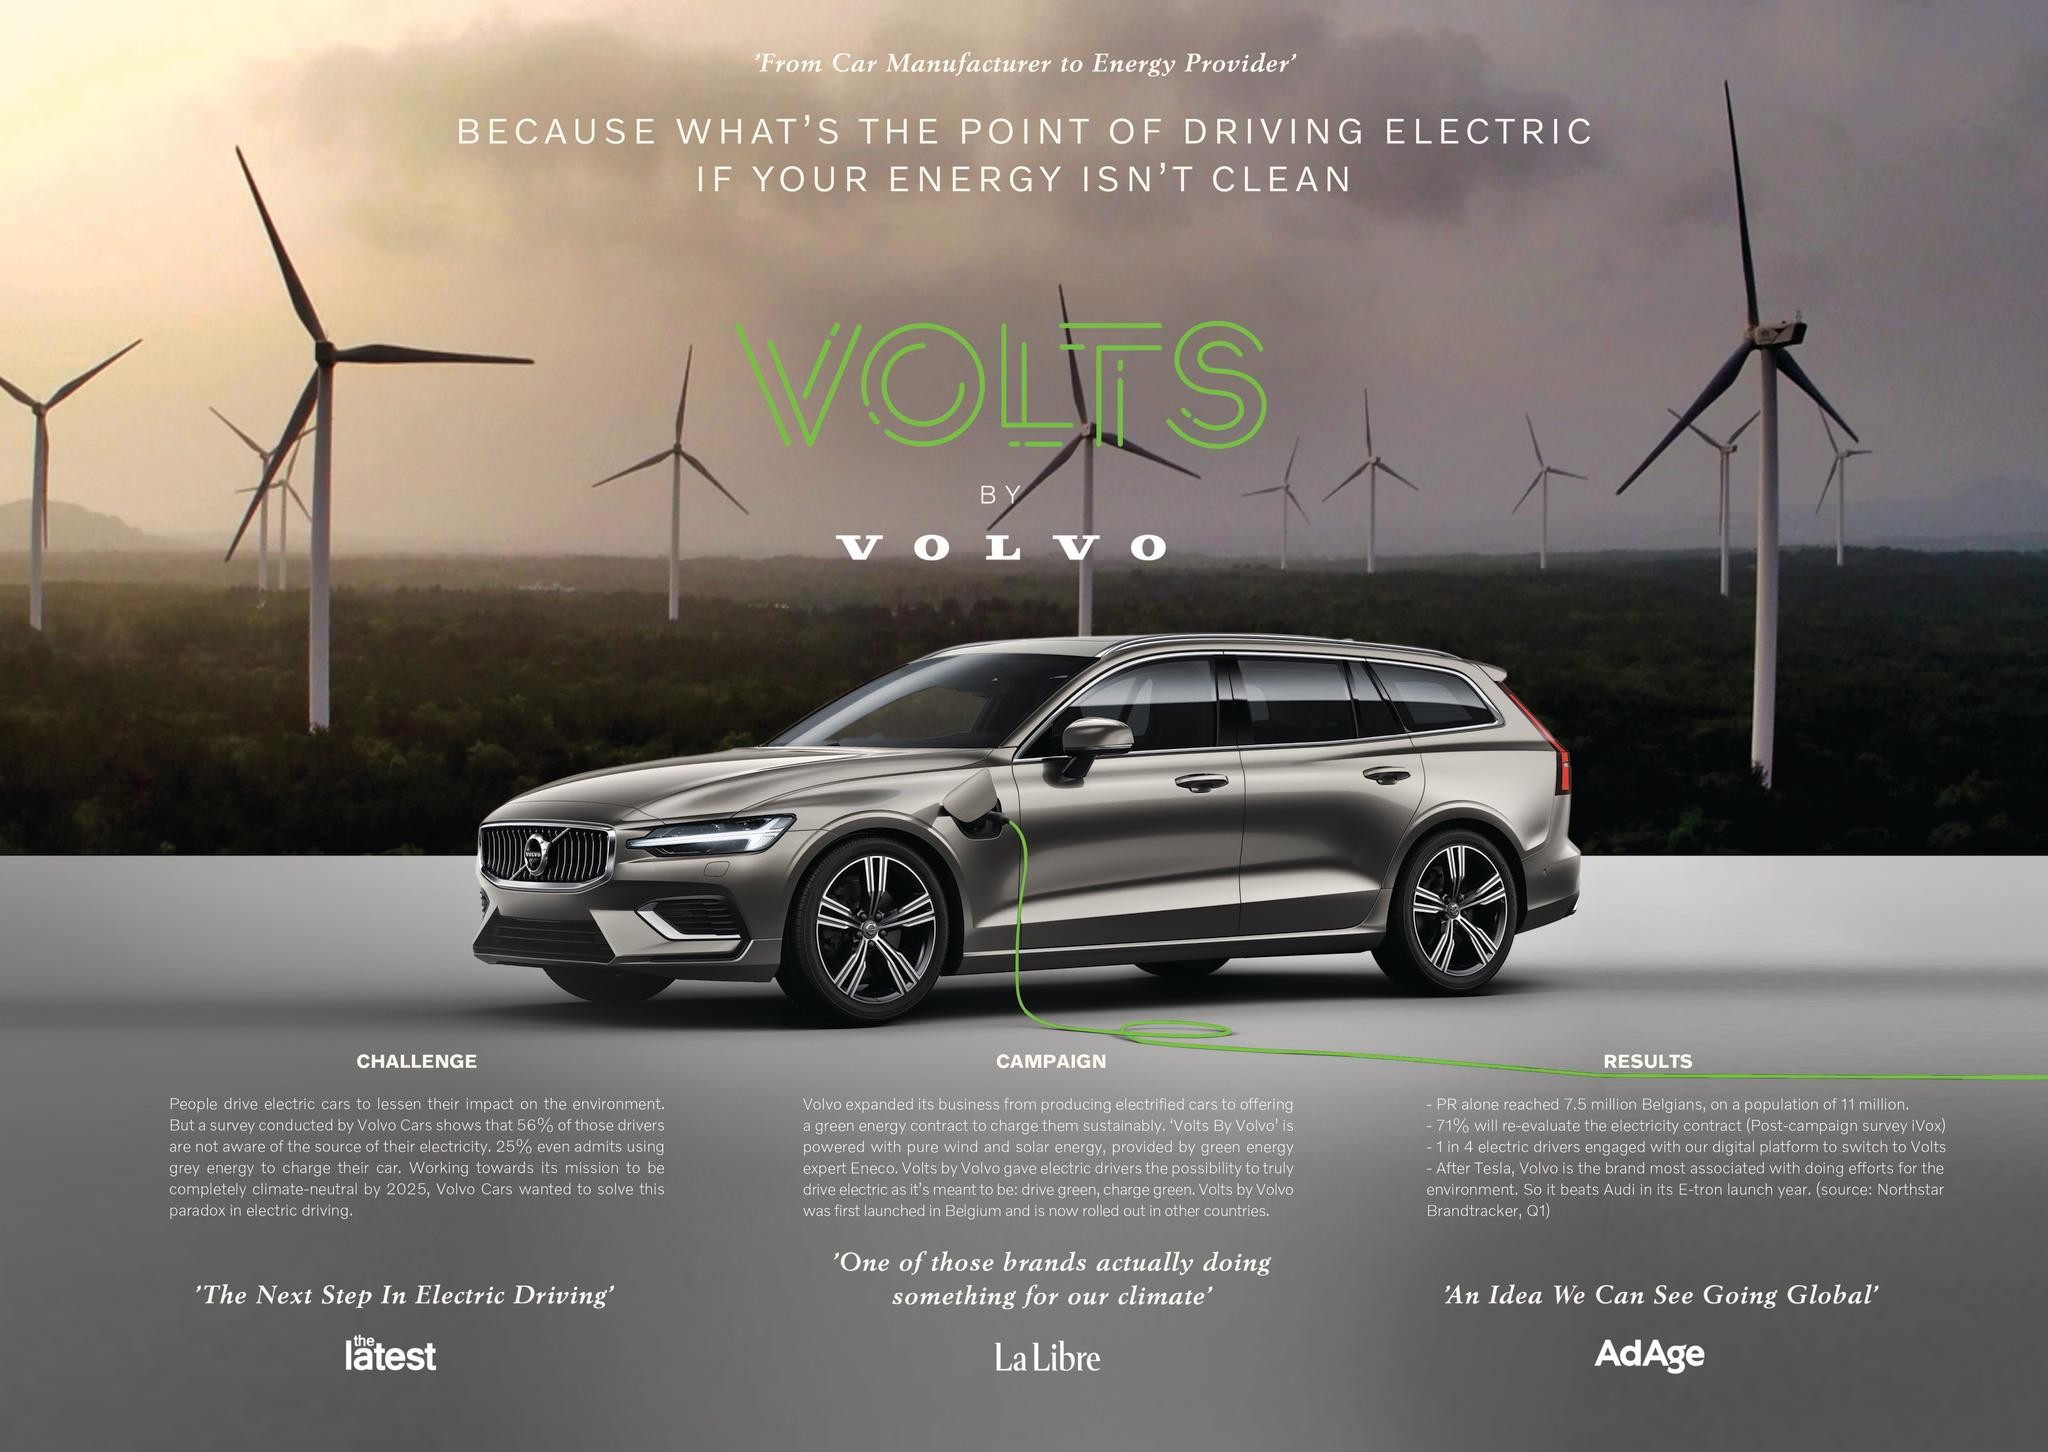 VOLTS BY VOLVO